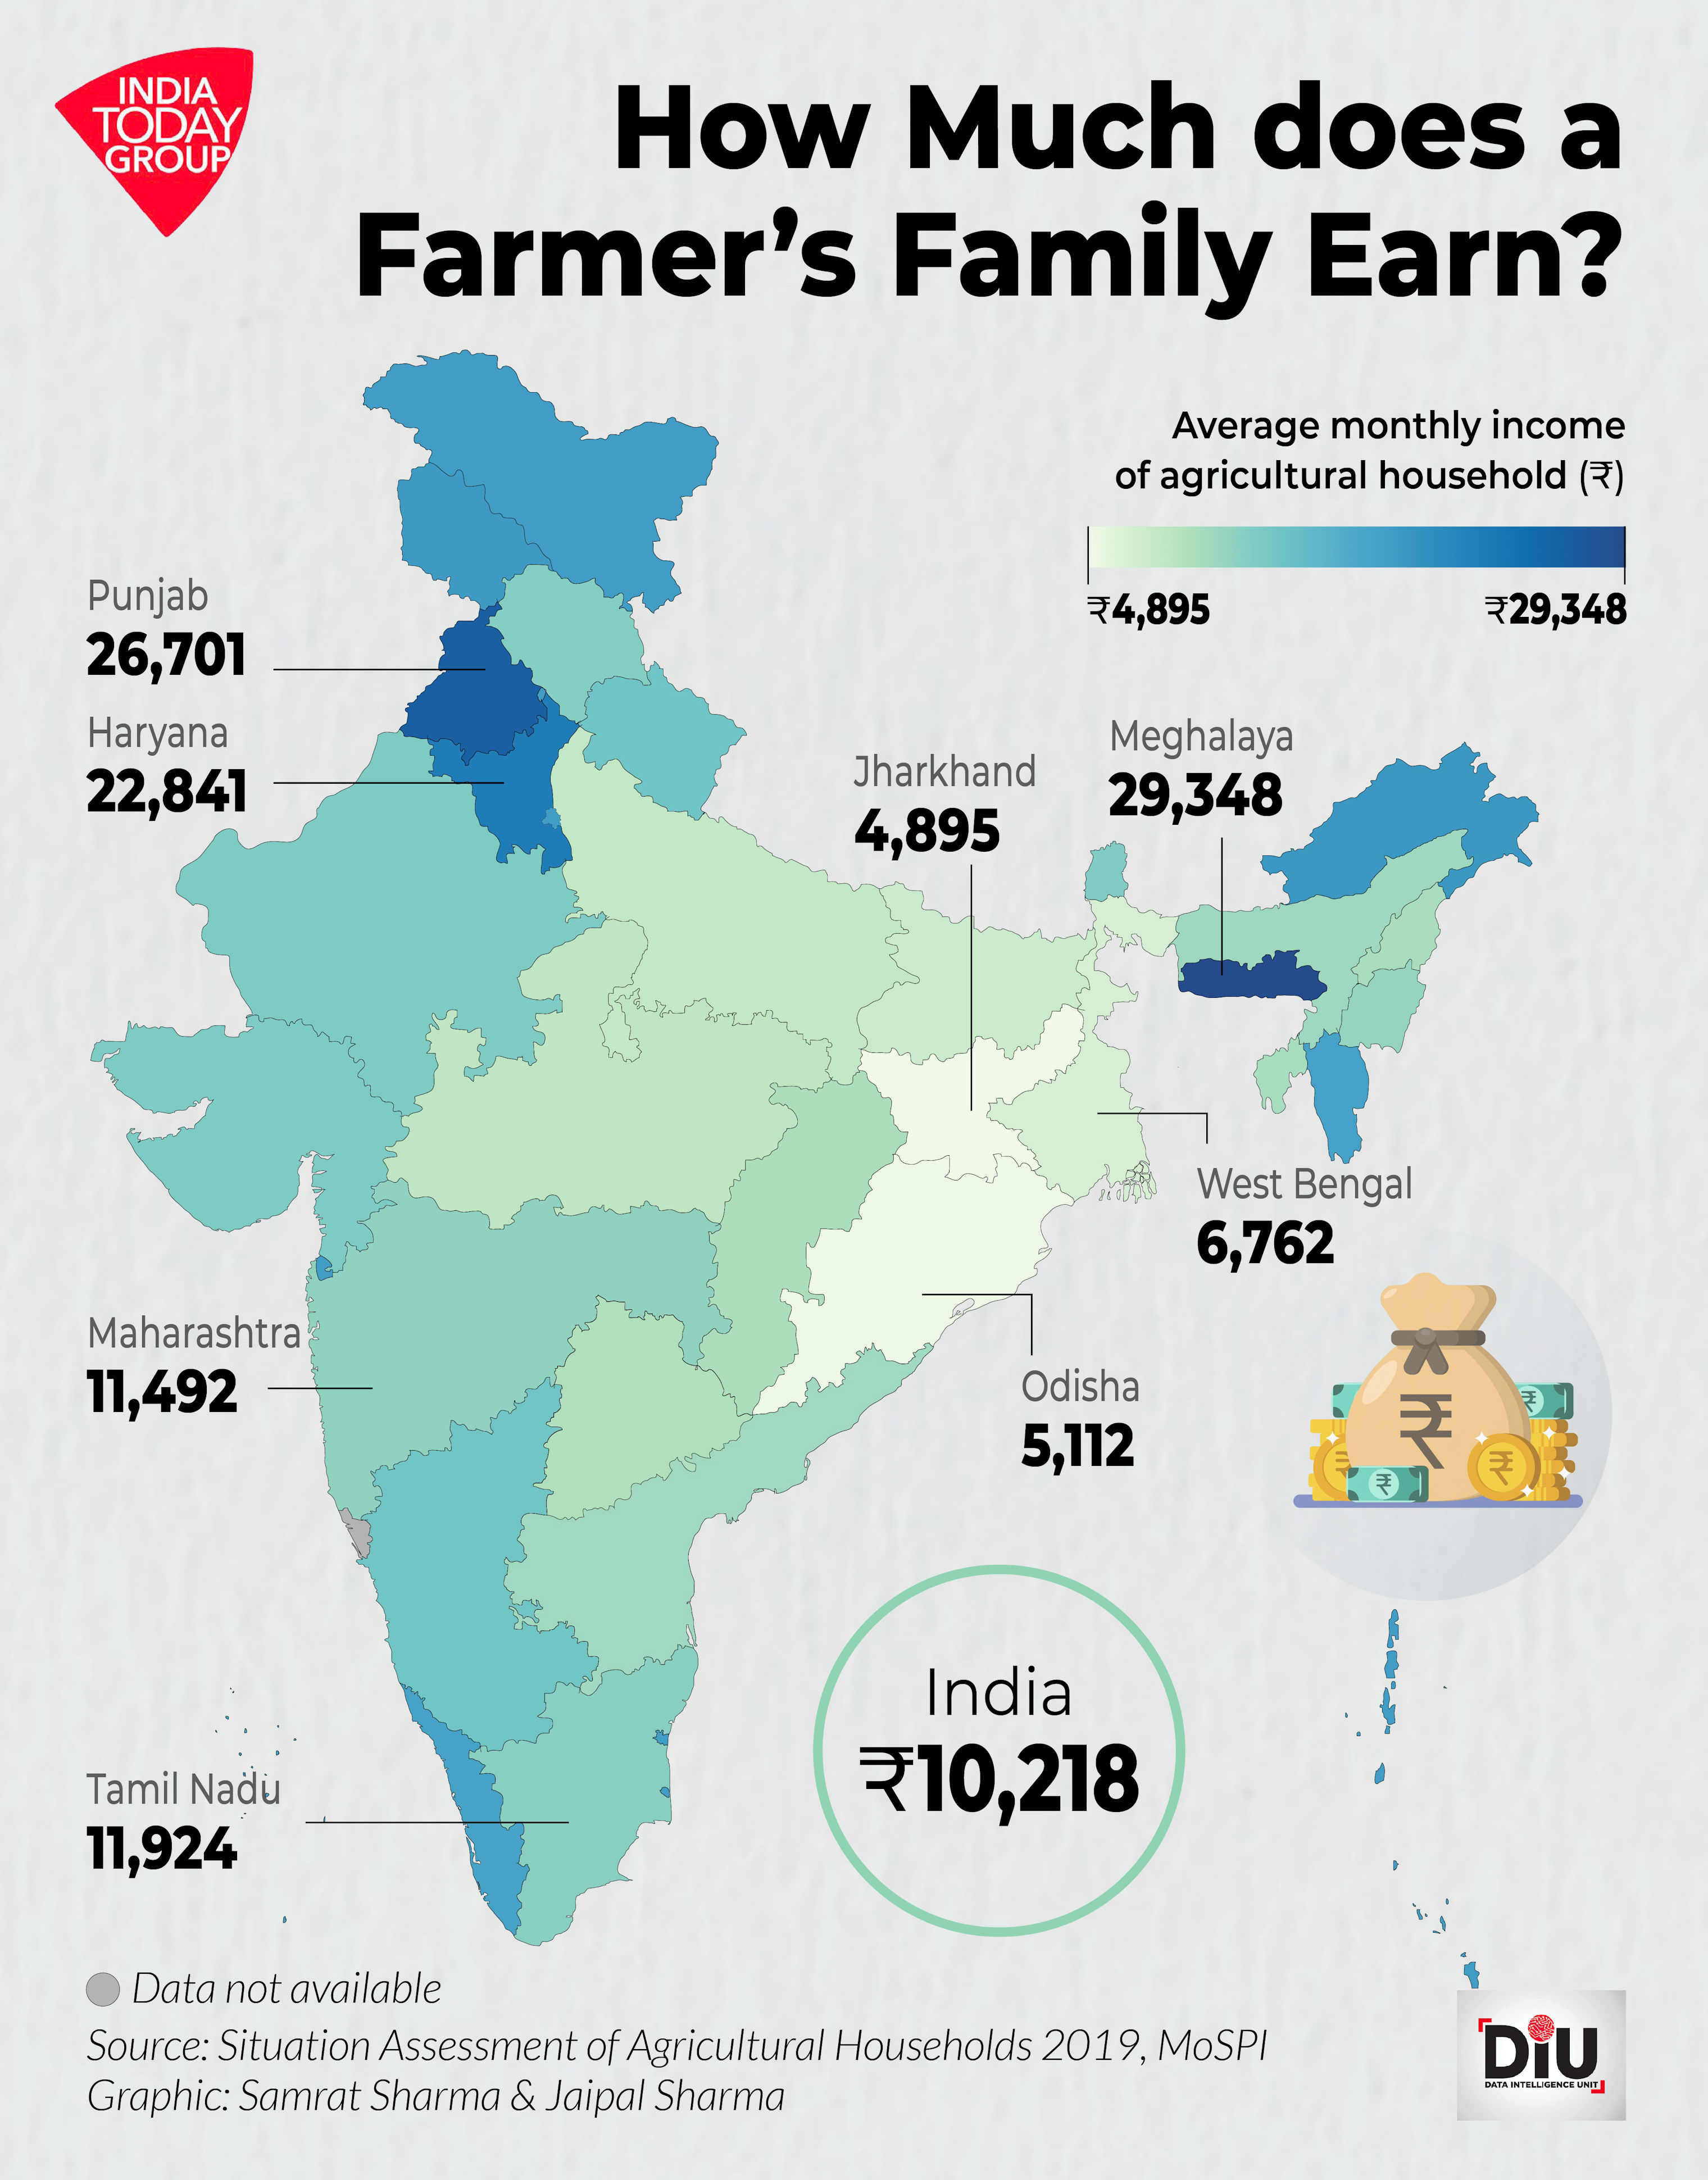 have farming outputs and incomes taken different trajectories?